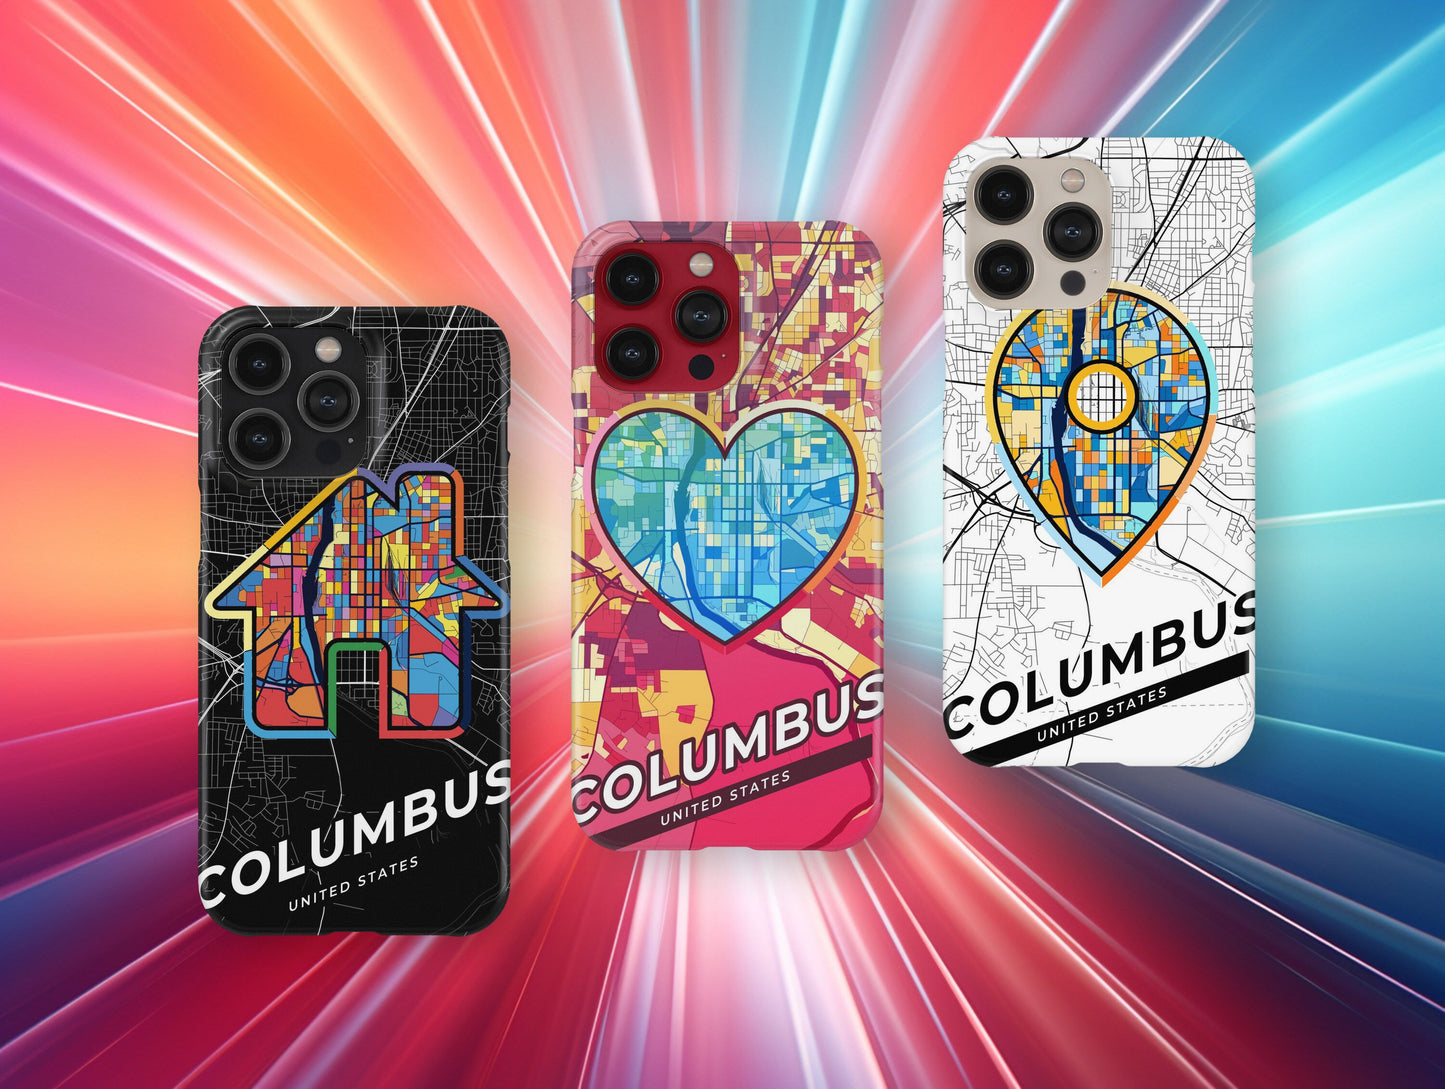 Columbus Georgia slim phone case with colorful icon. Birthday, wedding or housewarming gift. Couple match cases.